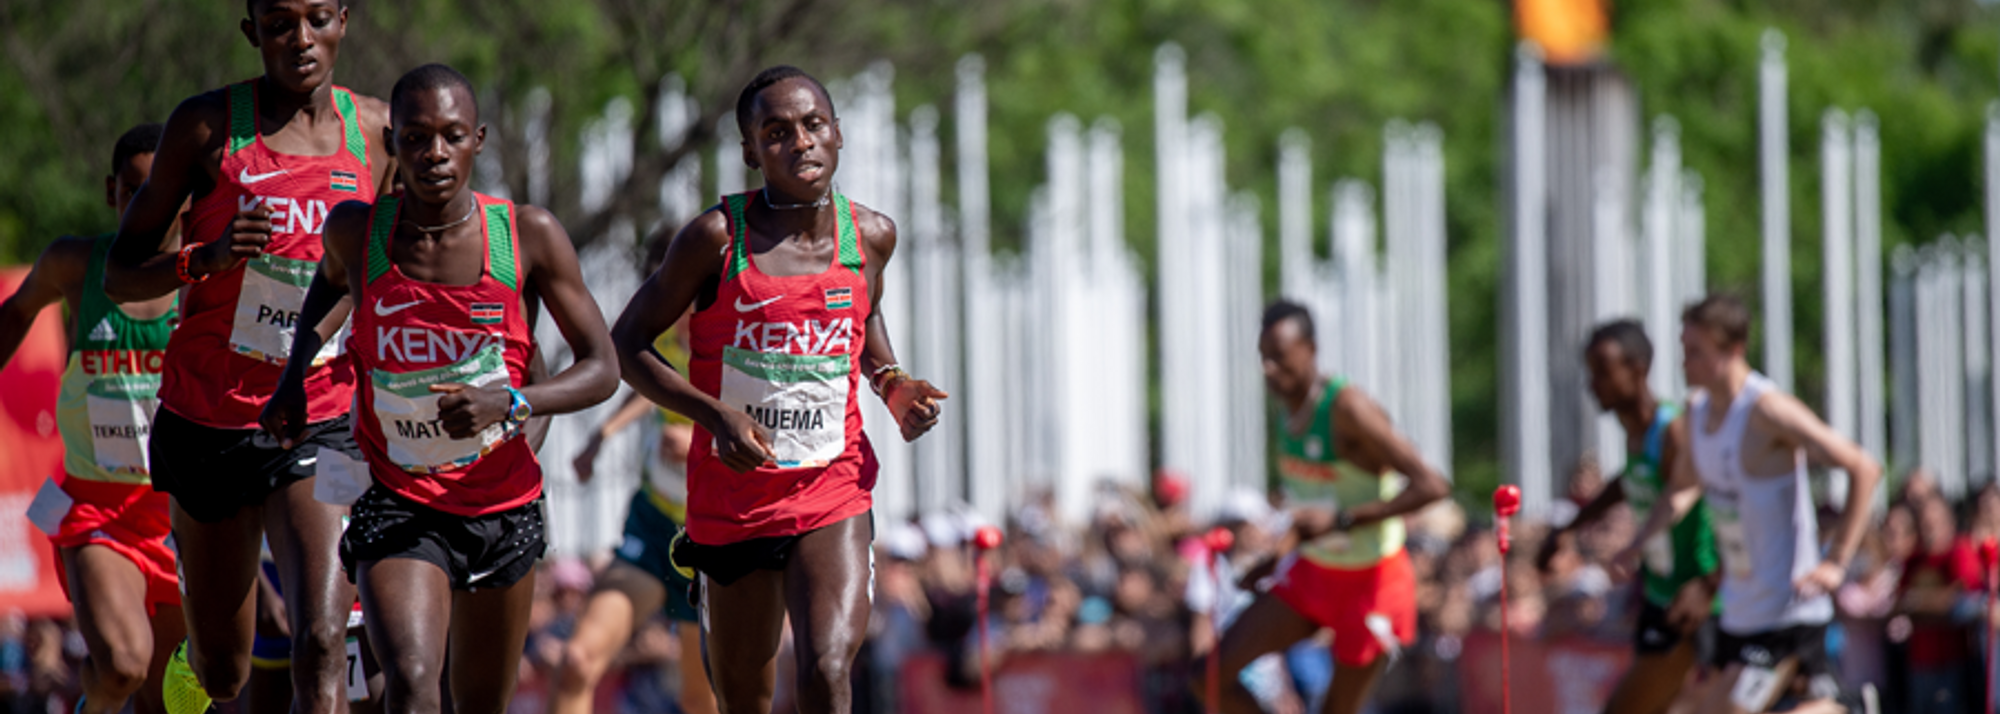 After a 94-year hiatus, cross country returned to the Olympic arena on Monday (15) at the Buenos Aires 2018 Youth Olympic Games.